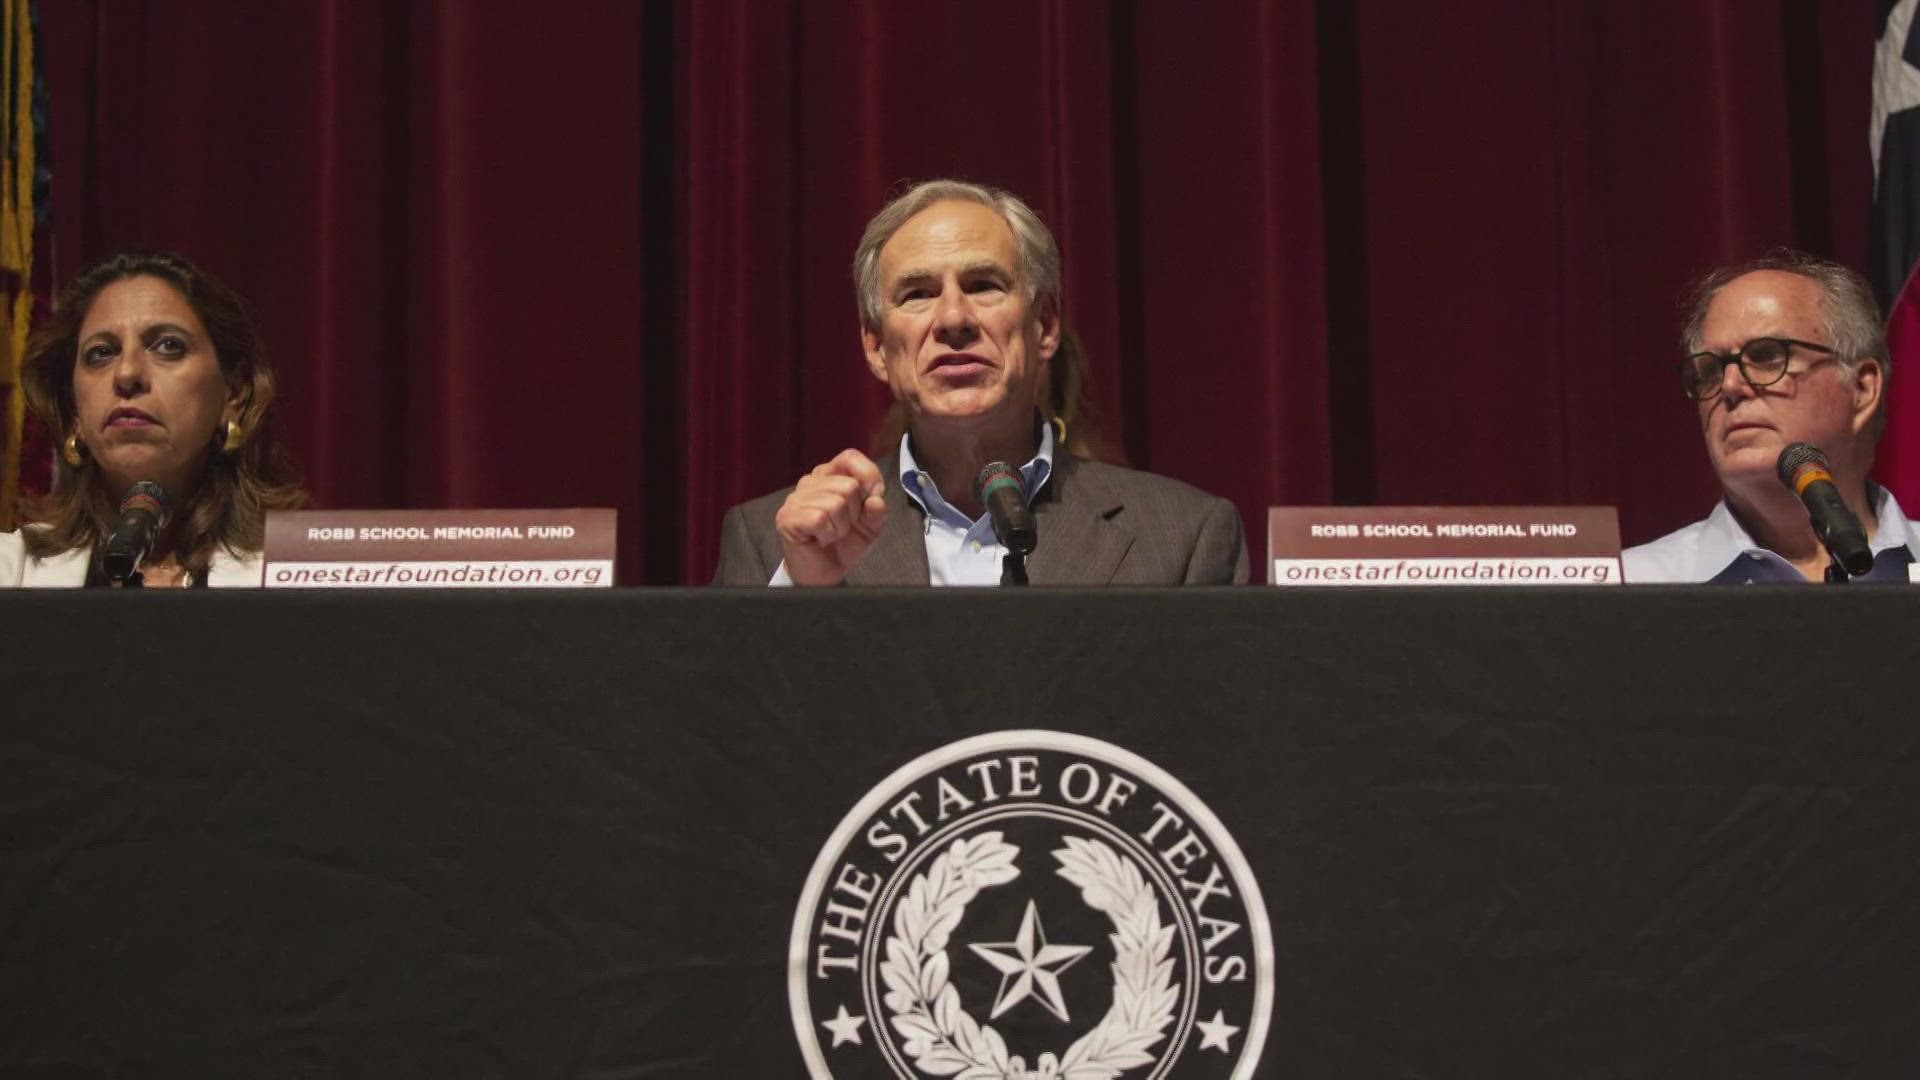 Texas Gov. Greg Abbott also said all options are on table as far as new laws that come from the horrific shooting at a Uvalde elementary school.